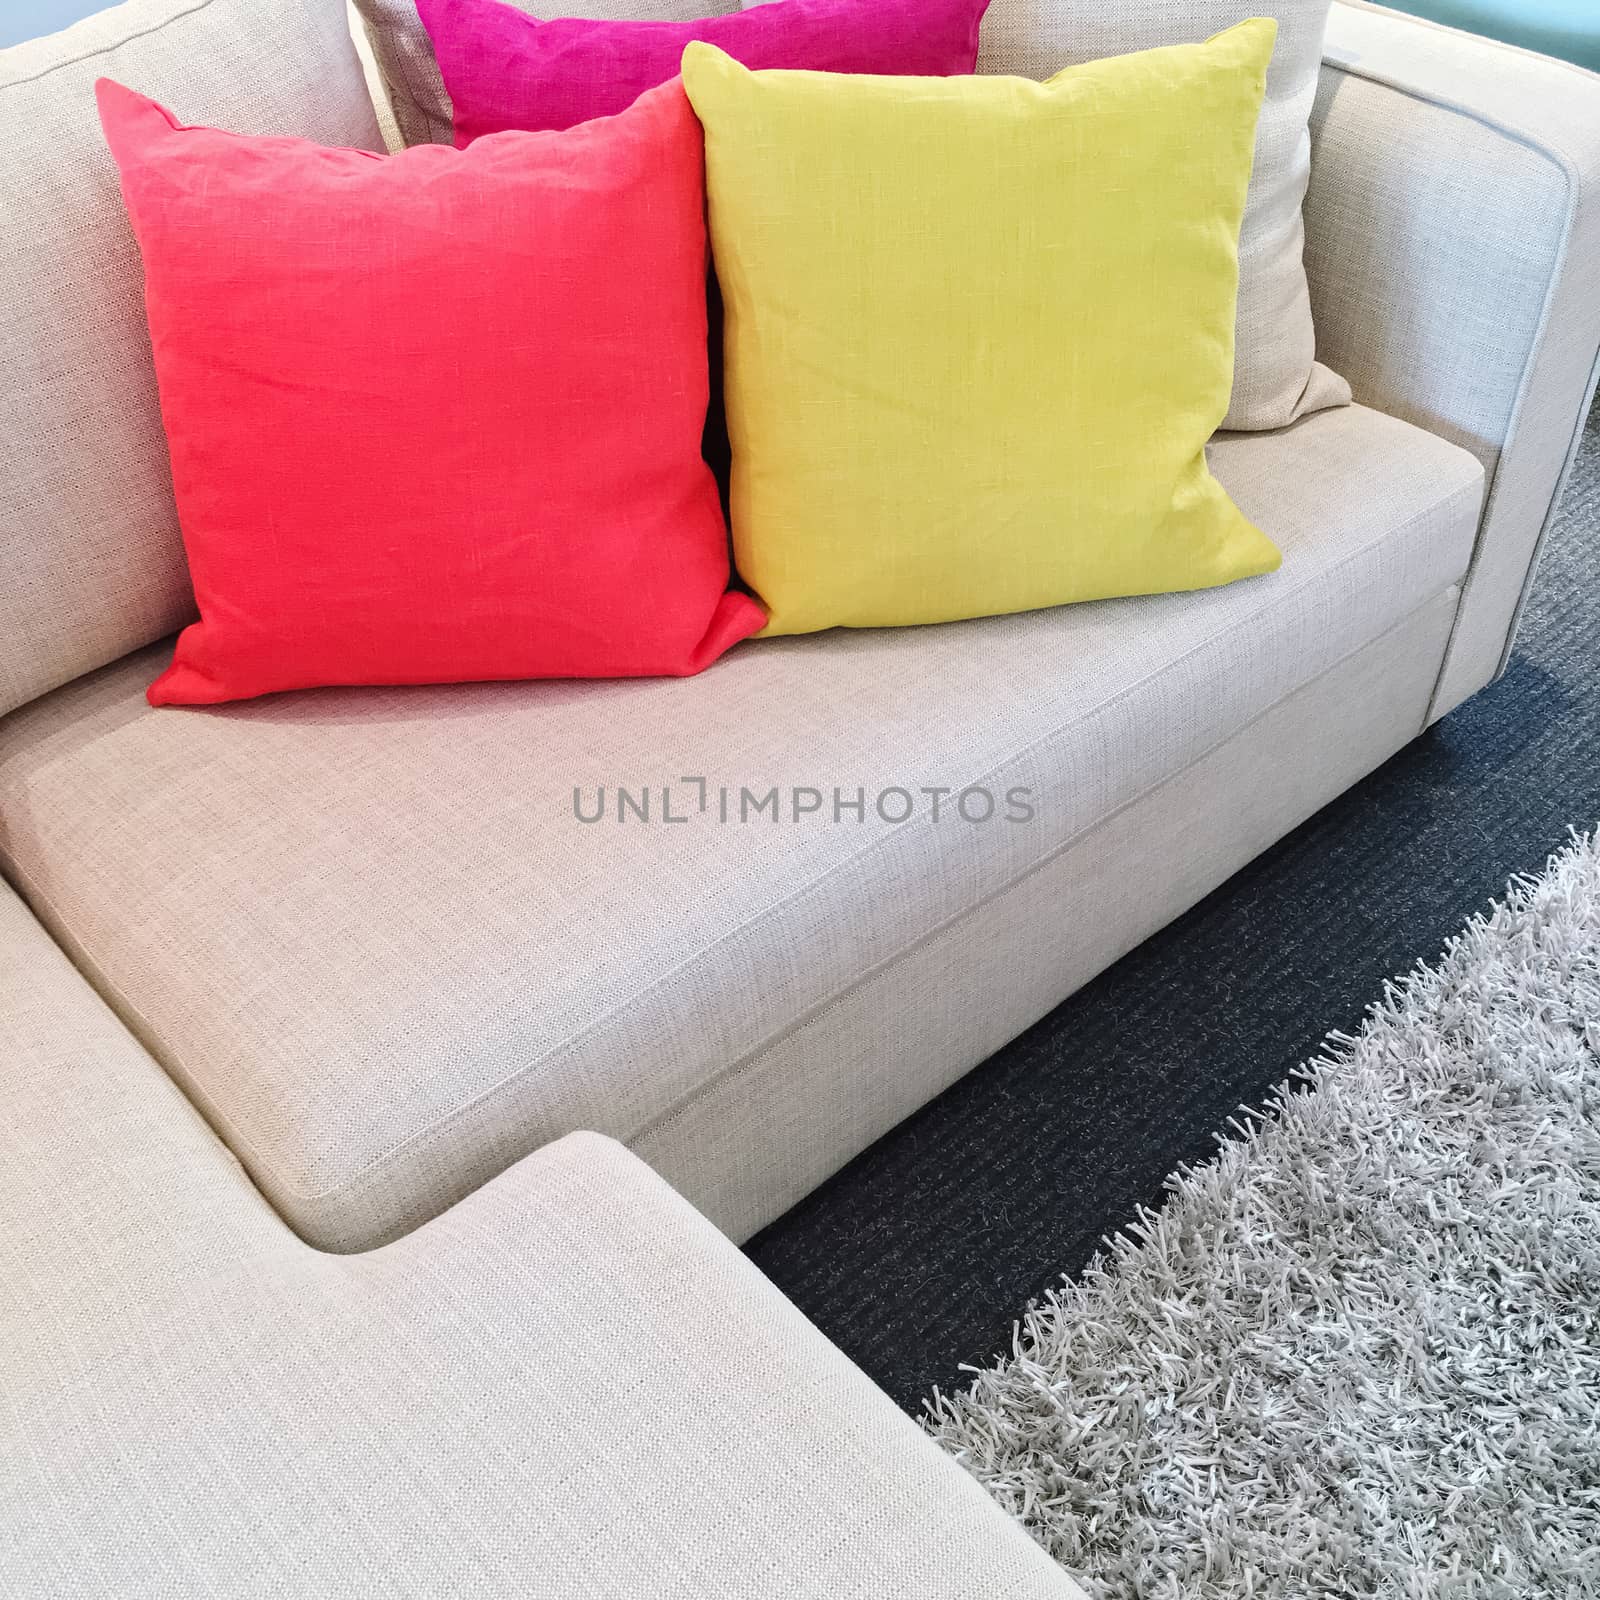 Bright pink and yellow cushions on a gray corner sofa.